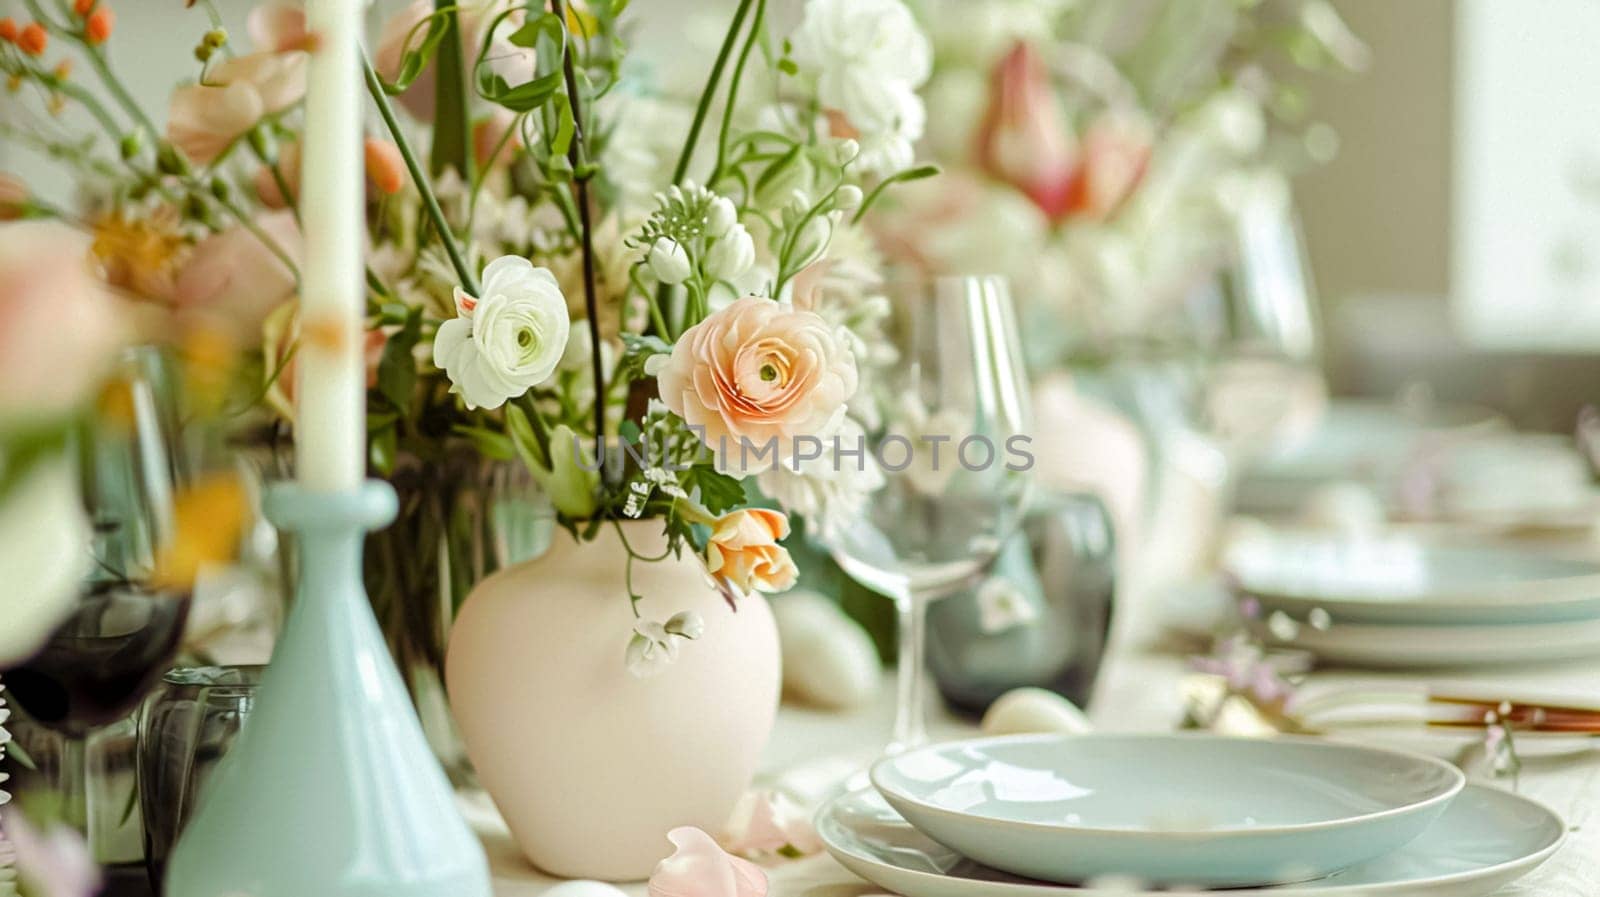 Easter tablescape decoration, floral holiday table decor for family celebration, spring flowers, Easter eggs, Easter bunny and vintage dinnerware, English country and home styling by Anneleven